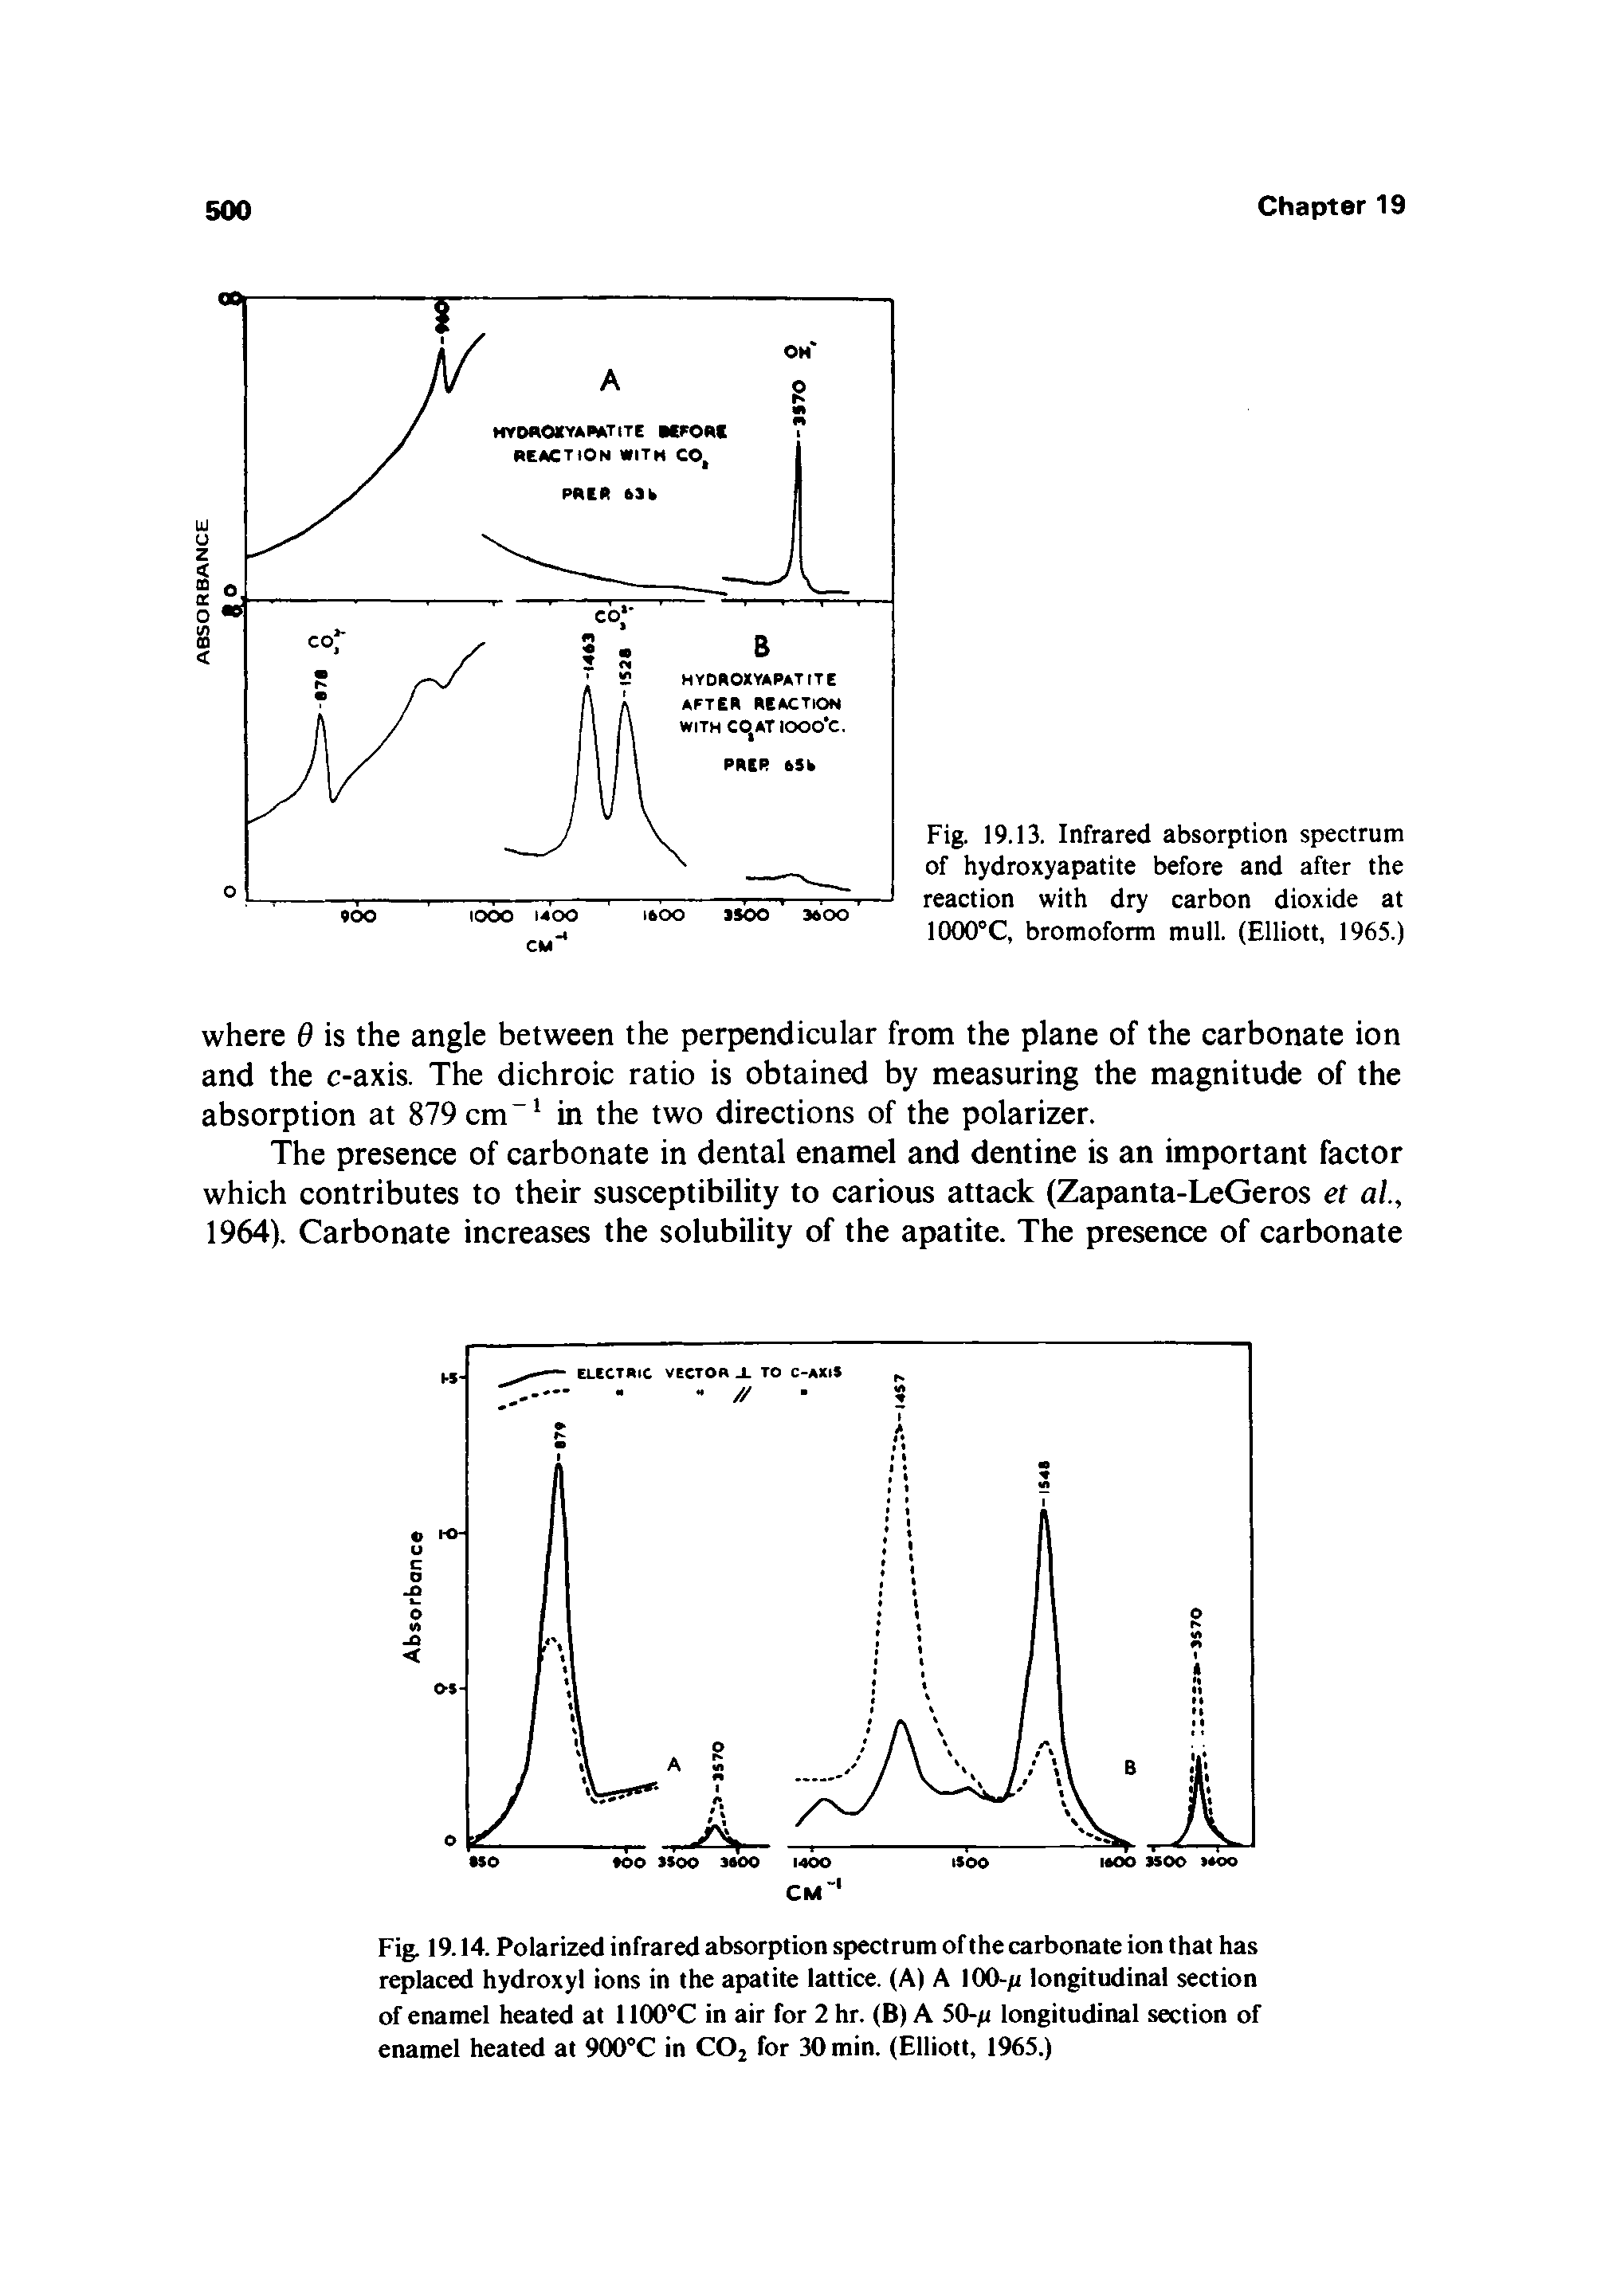 Fig. 19.13. Infrared absorption spectrum of hydroxyapatite before and after the reaction with dry carbon dioxide at 1000°C, bromoform mull. (Elliott, 1965.)...